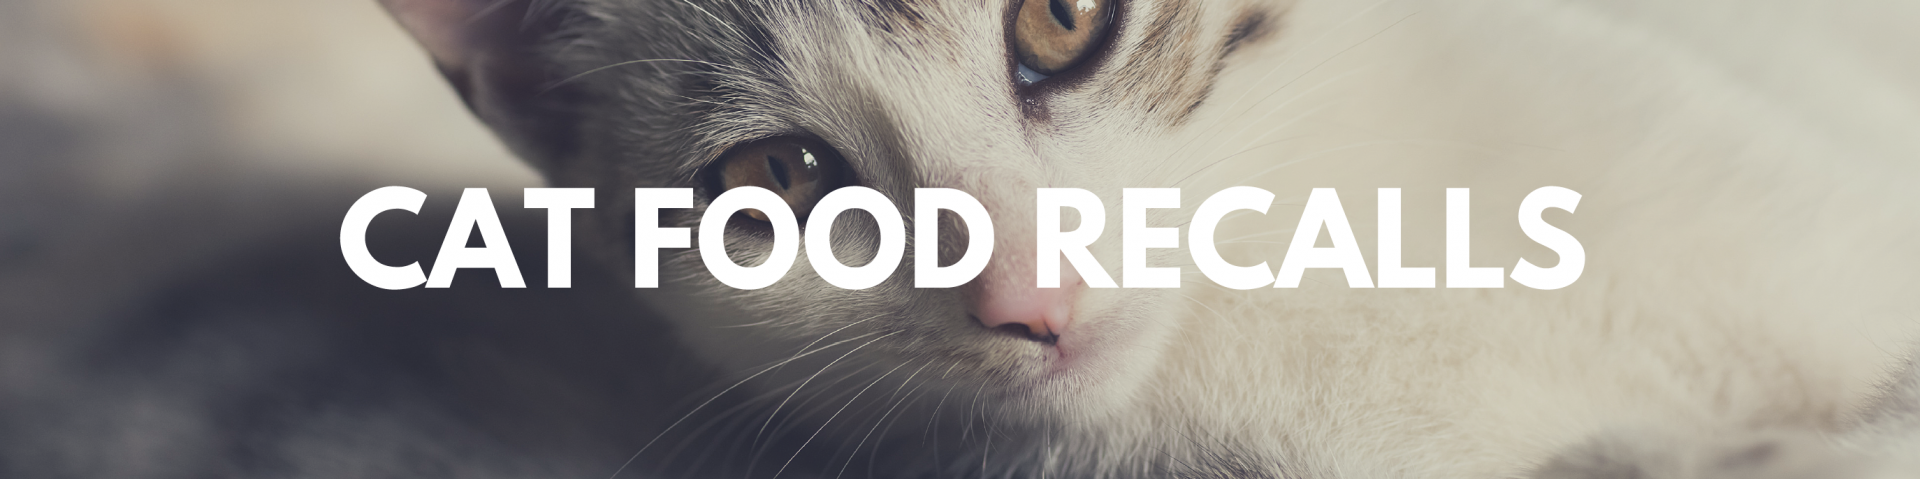 ⚠️ Cat Food Recalls 2020-2021: Is Your Brand on This List?